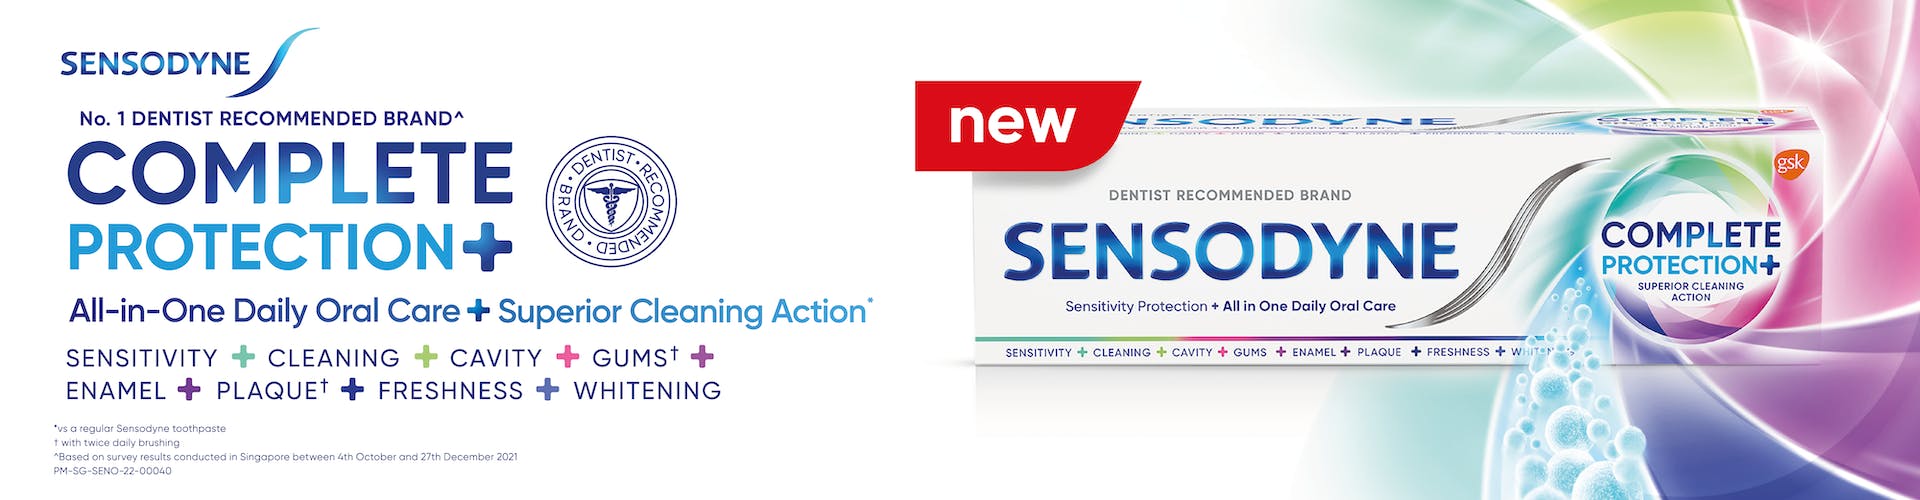 GSK Sensodyne Olympia Complete Protection